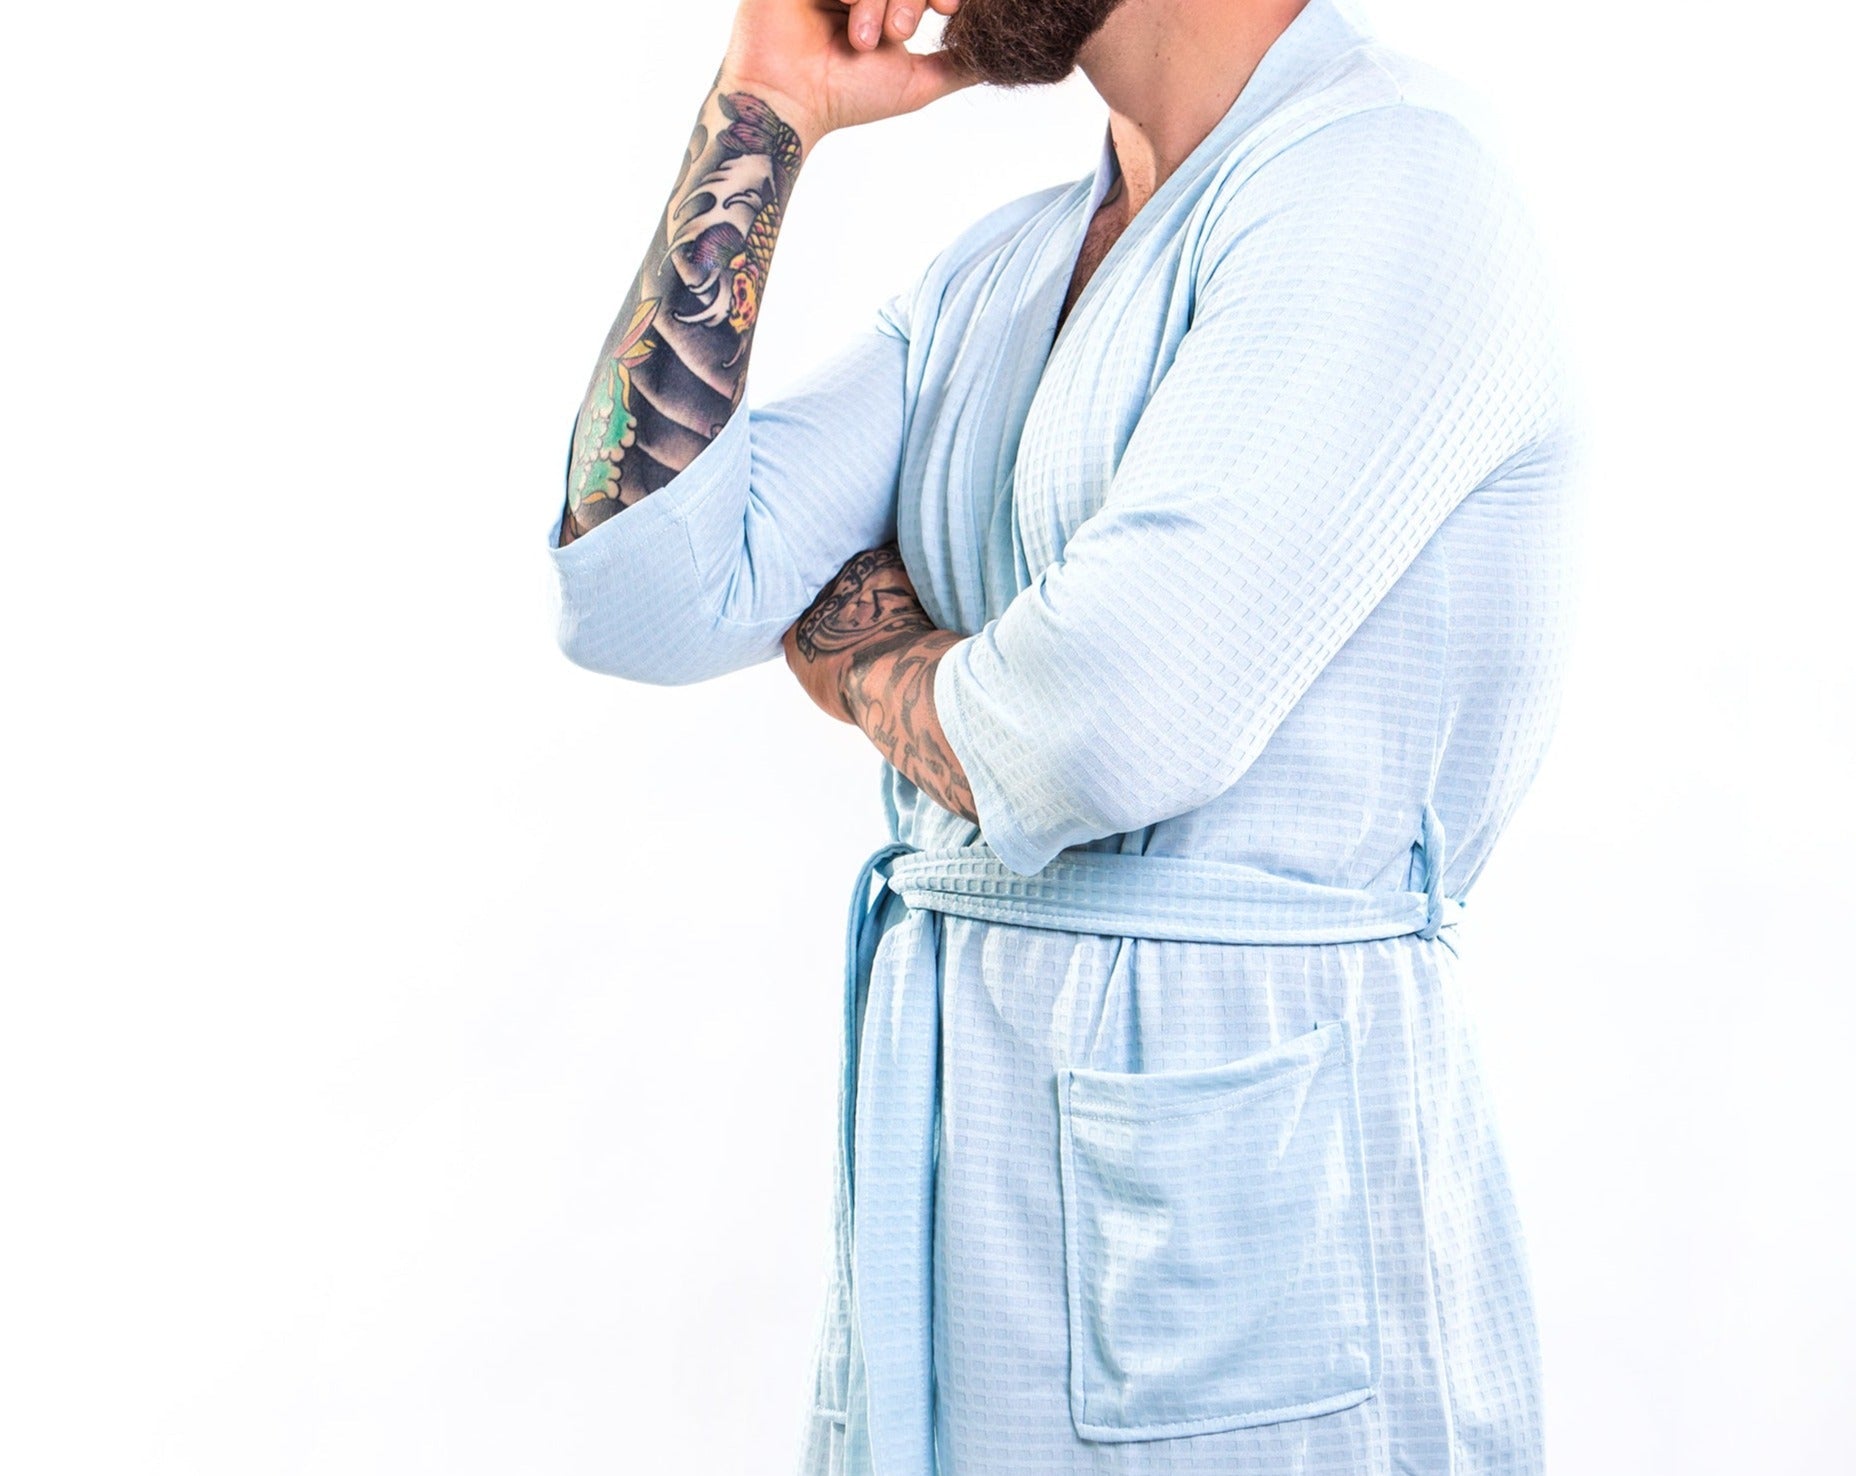 Men’s Waffle Knit Customized Robes - men’s robes